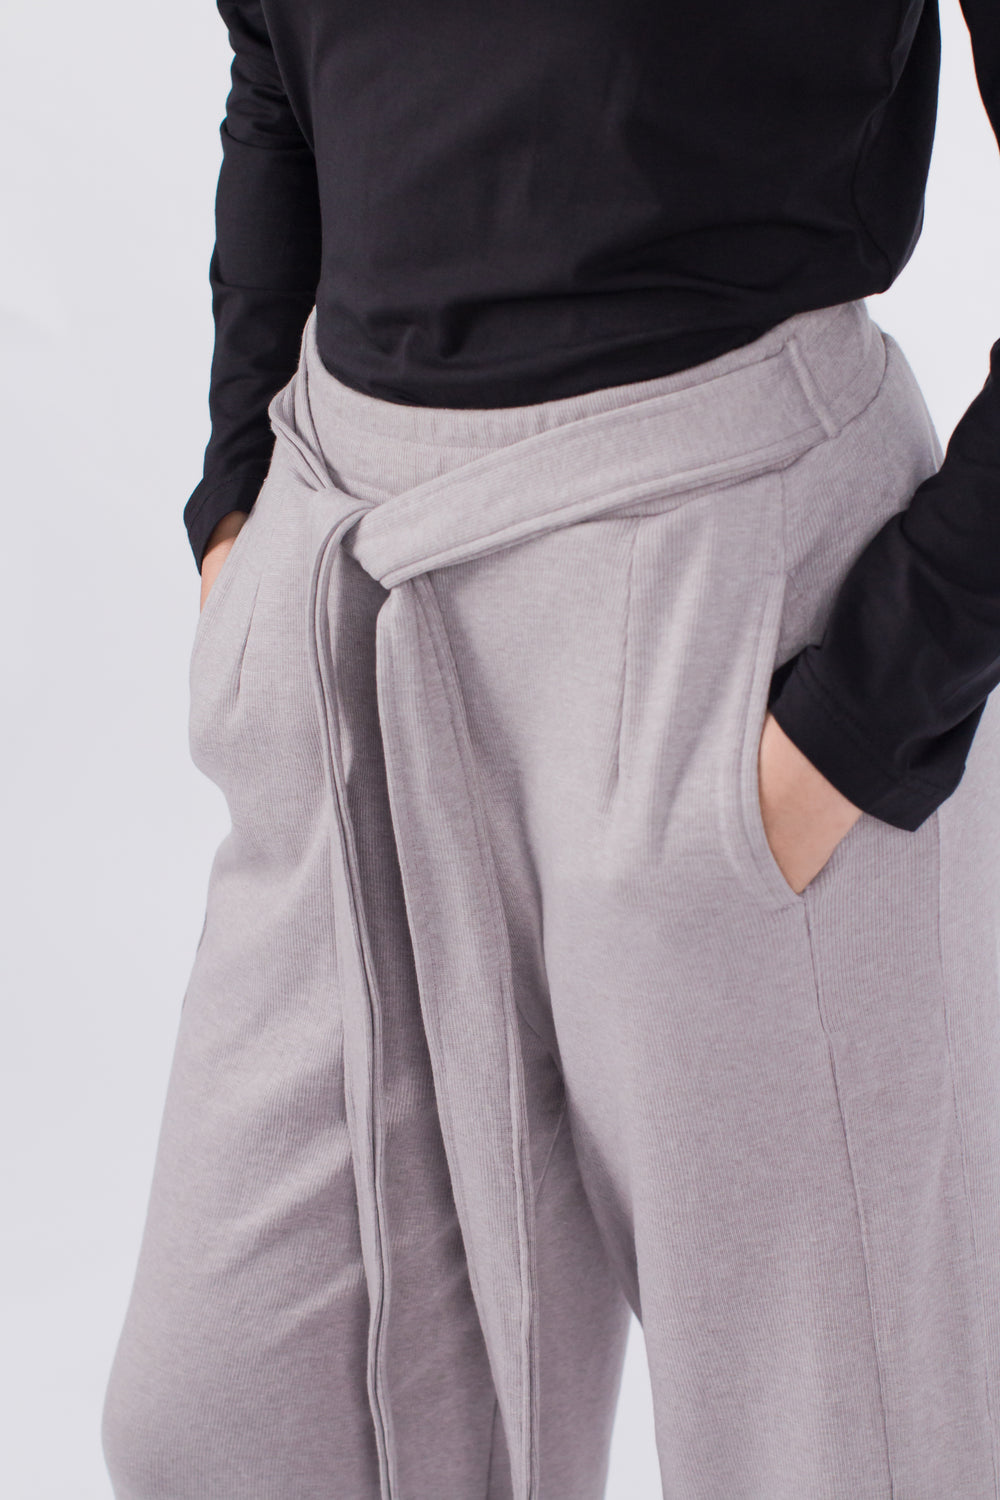 Muzca Sybil Side Slith Pants In Grey Modest Loose Women Ankle Trousers with Belt, Pockets in 100% Cotton